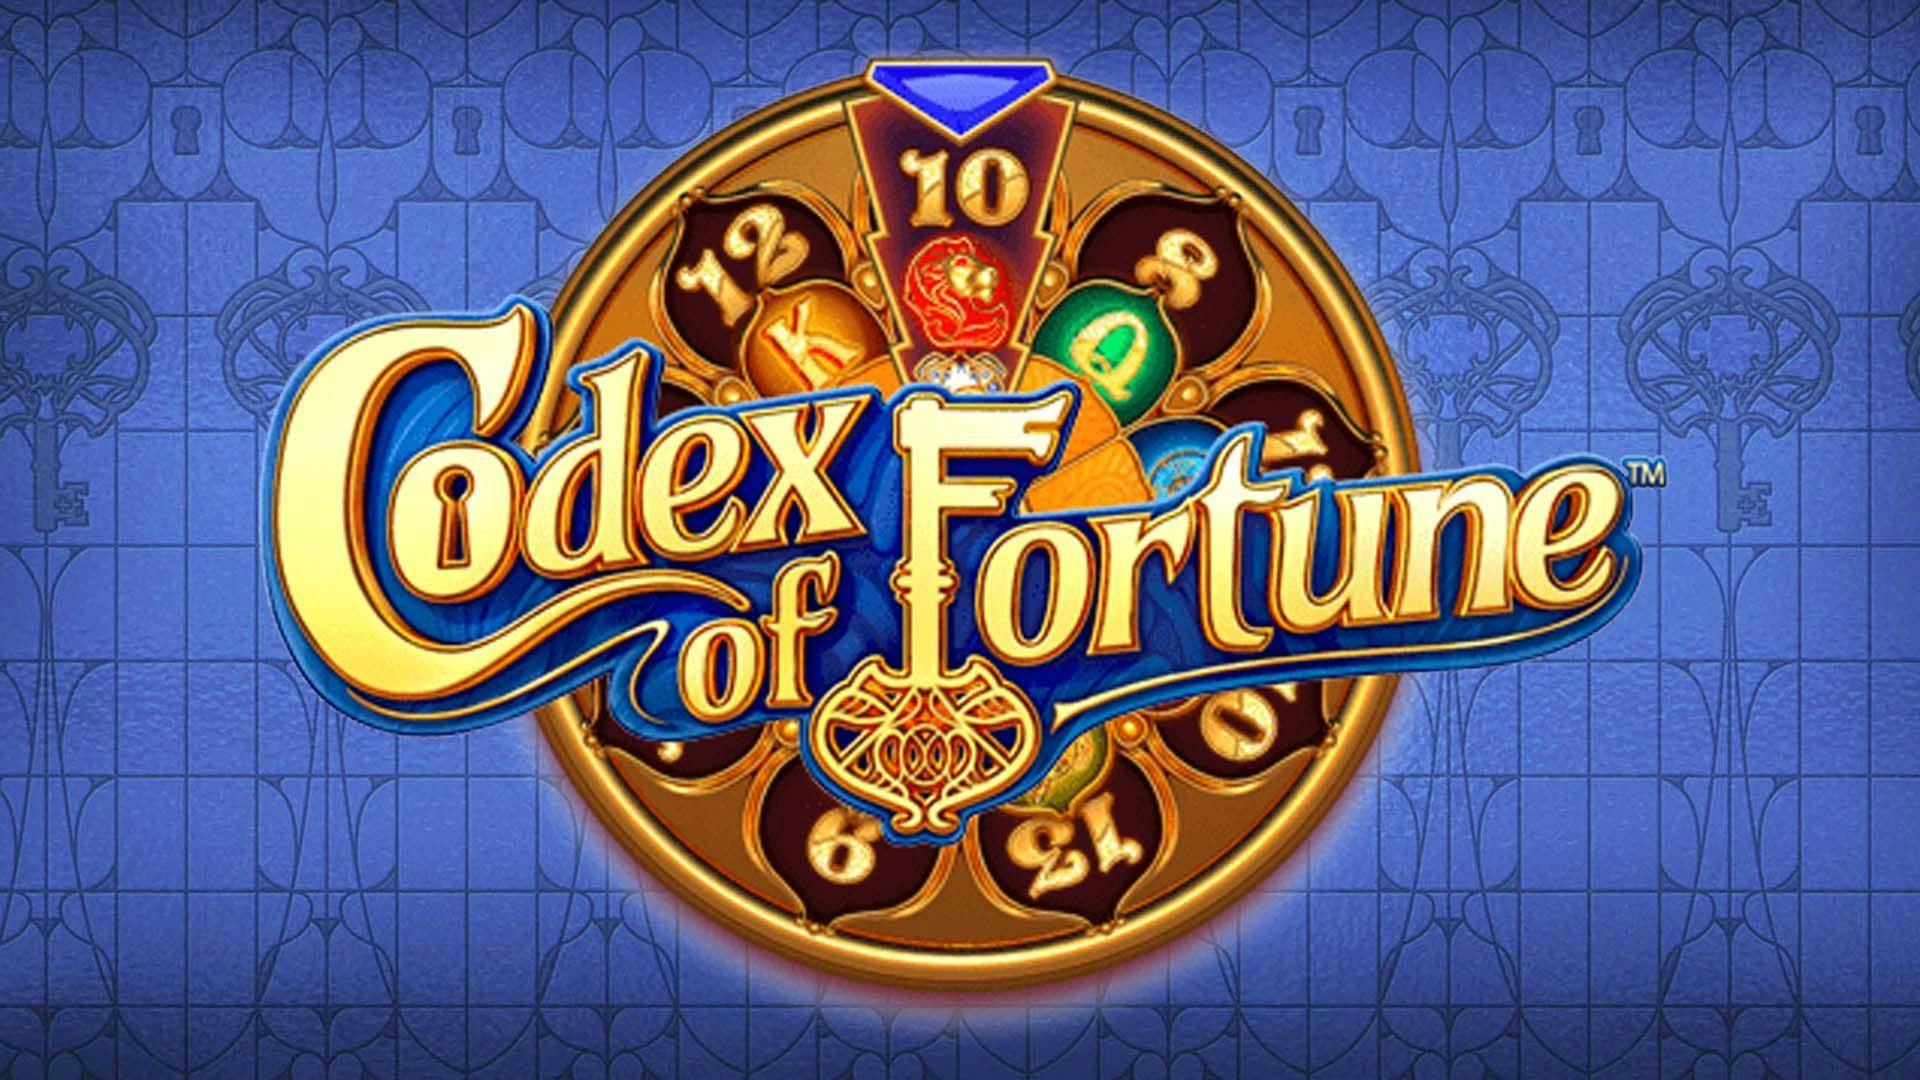 Codex Of Fortune Slot Online Free Play